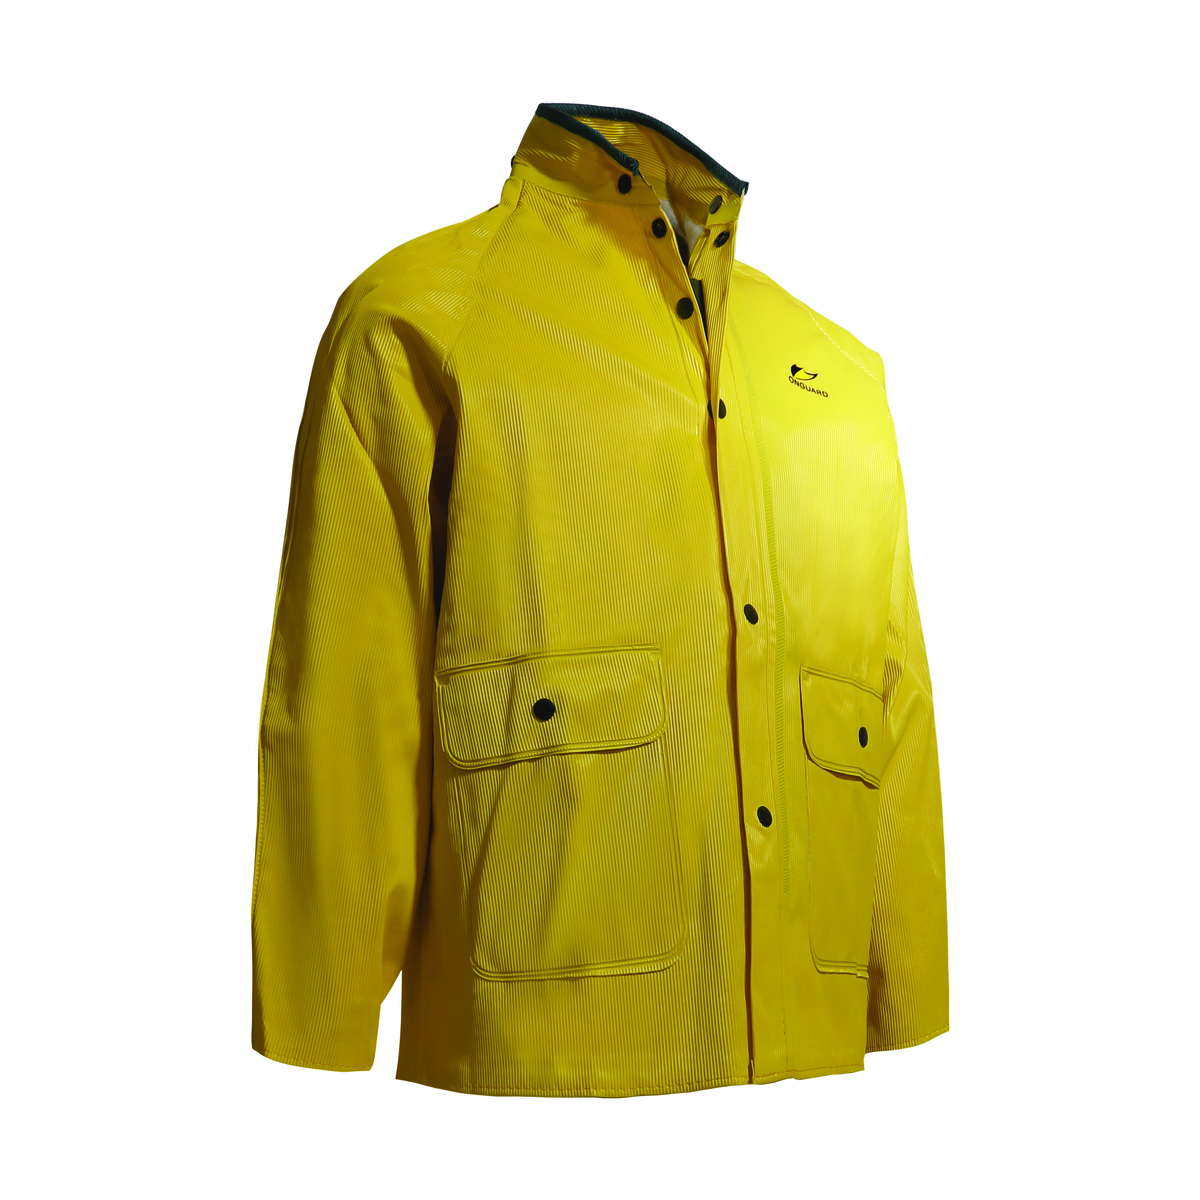 Dunlop® Protective Footwear Small Yellow Webtex .65 mm Polyester/PVC Rain Jacket With Hood Snaps